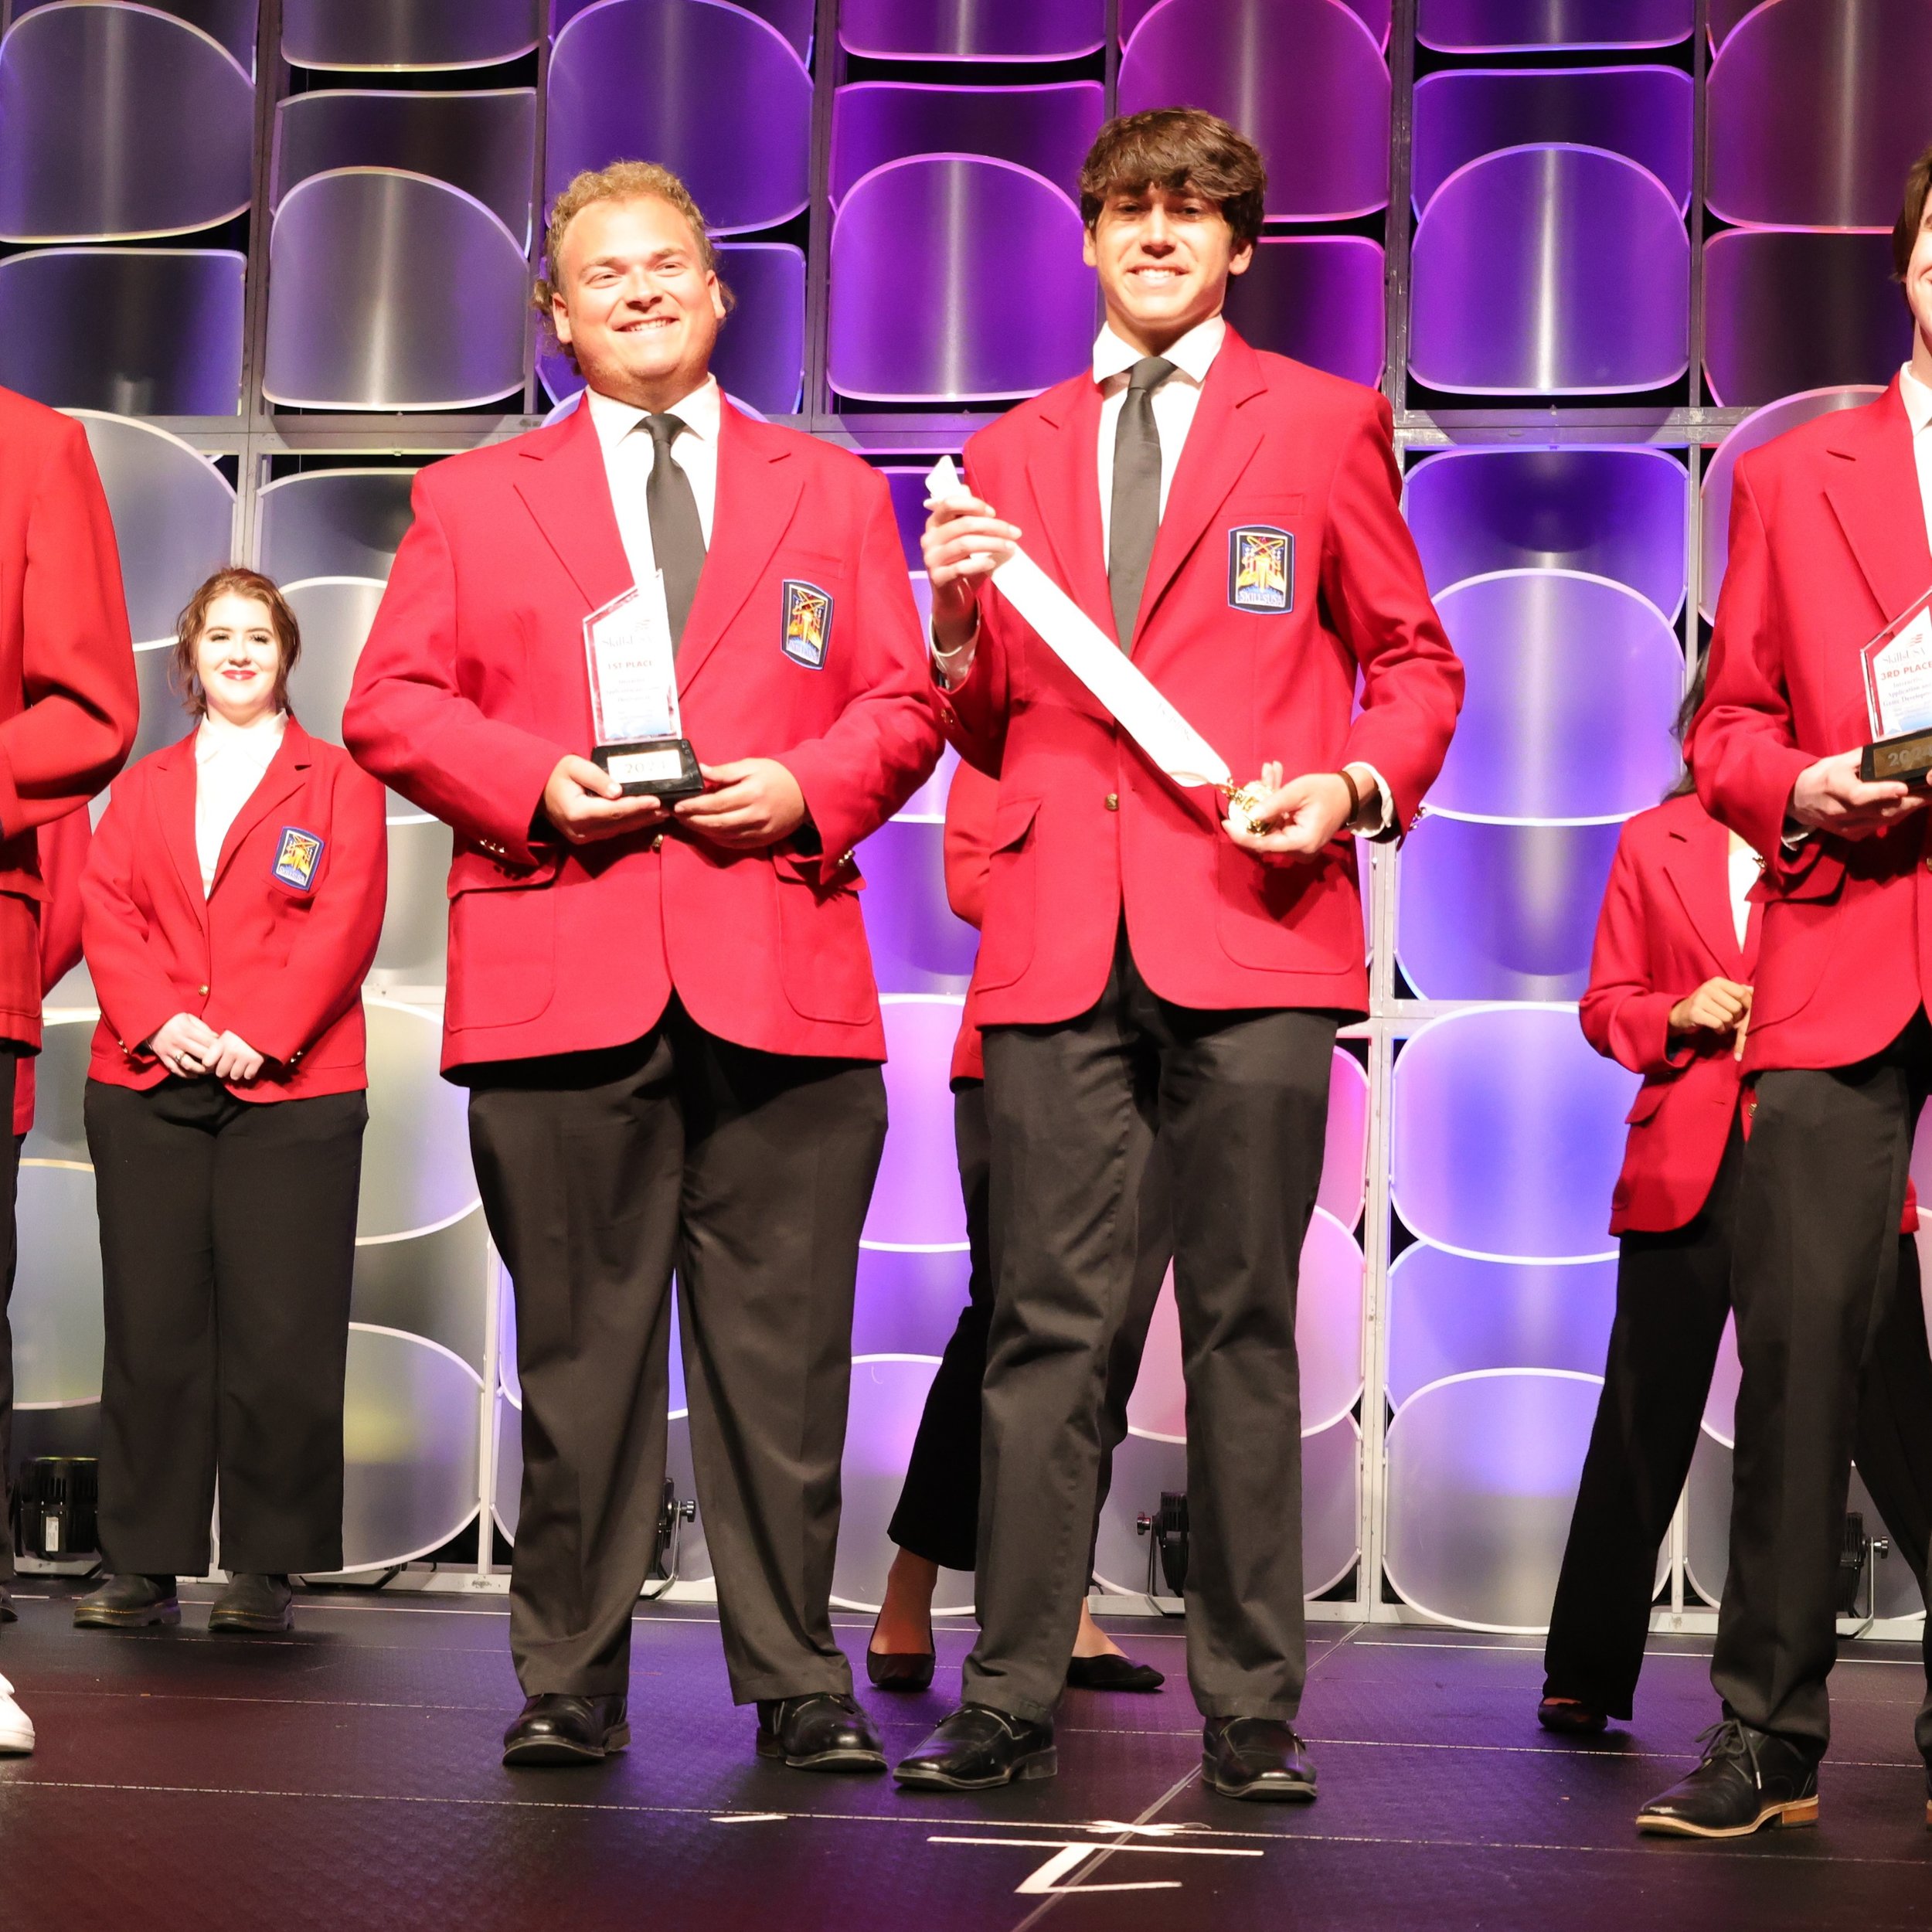 Congrats to Multimedia students Micah Hefner and Zach Snider for winning first place in Interactive Game Design at the State SkillsUSA Conference!